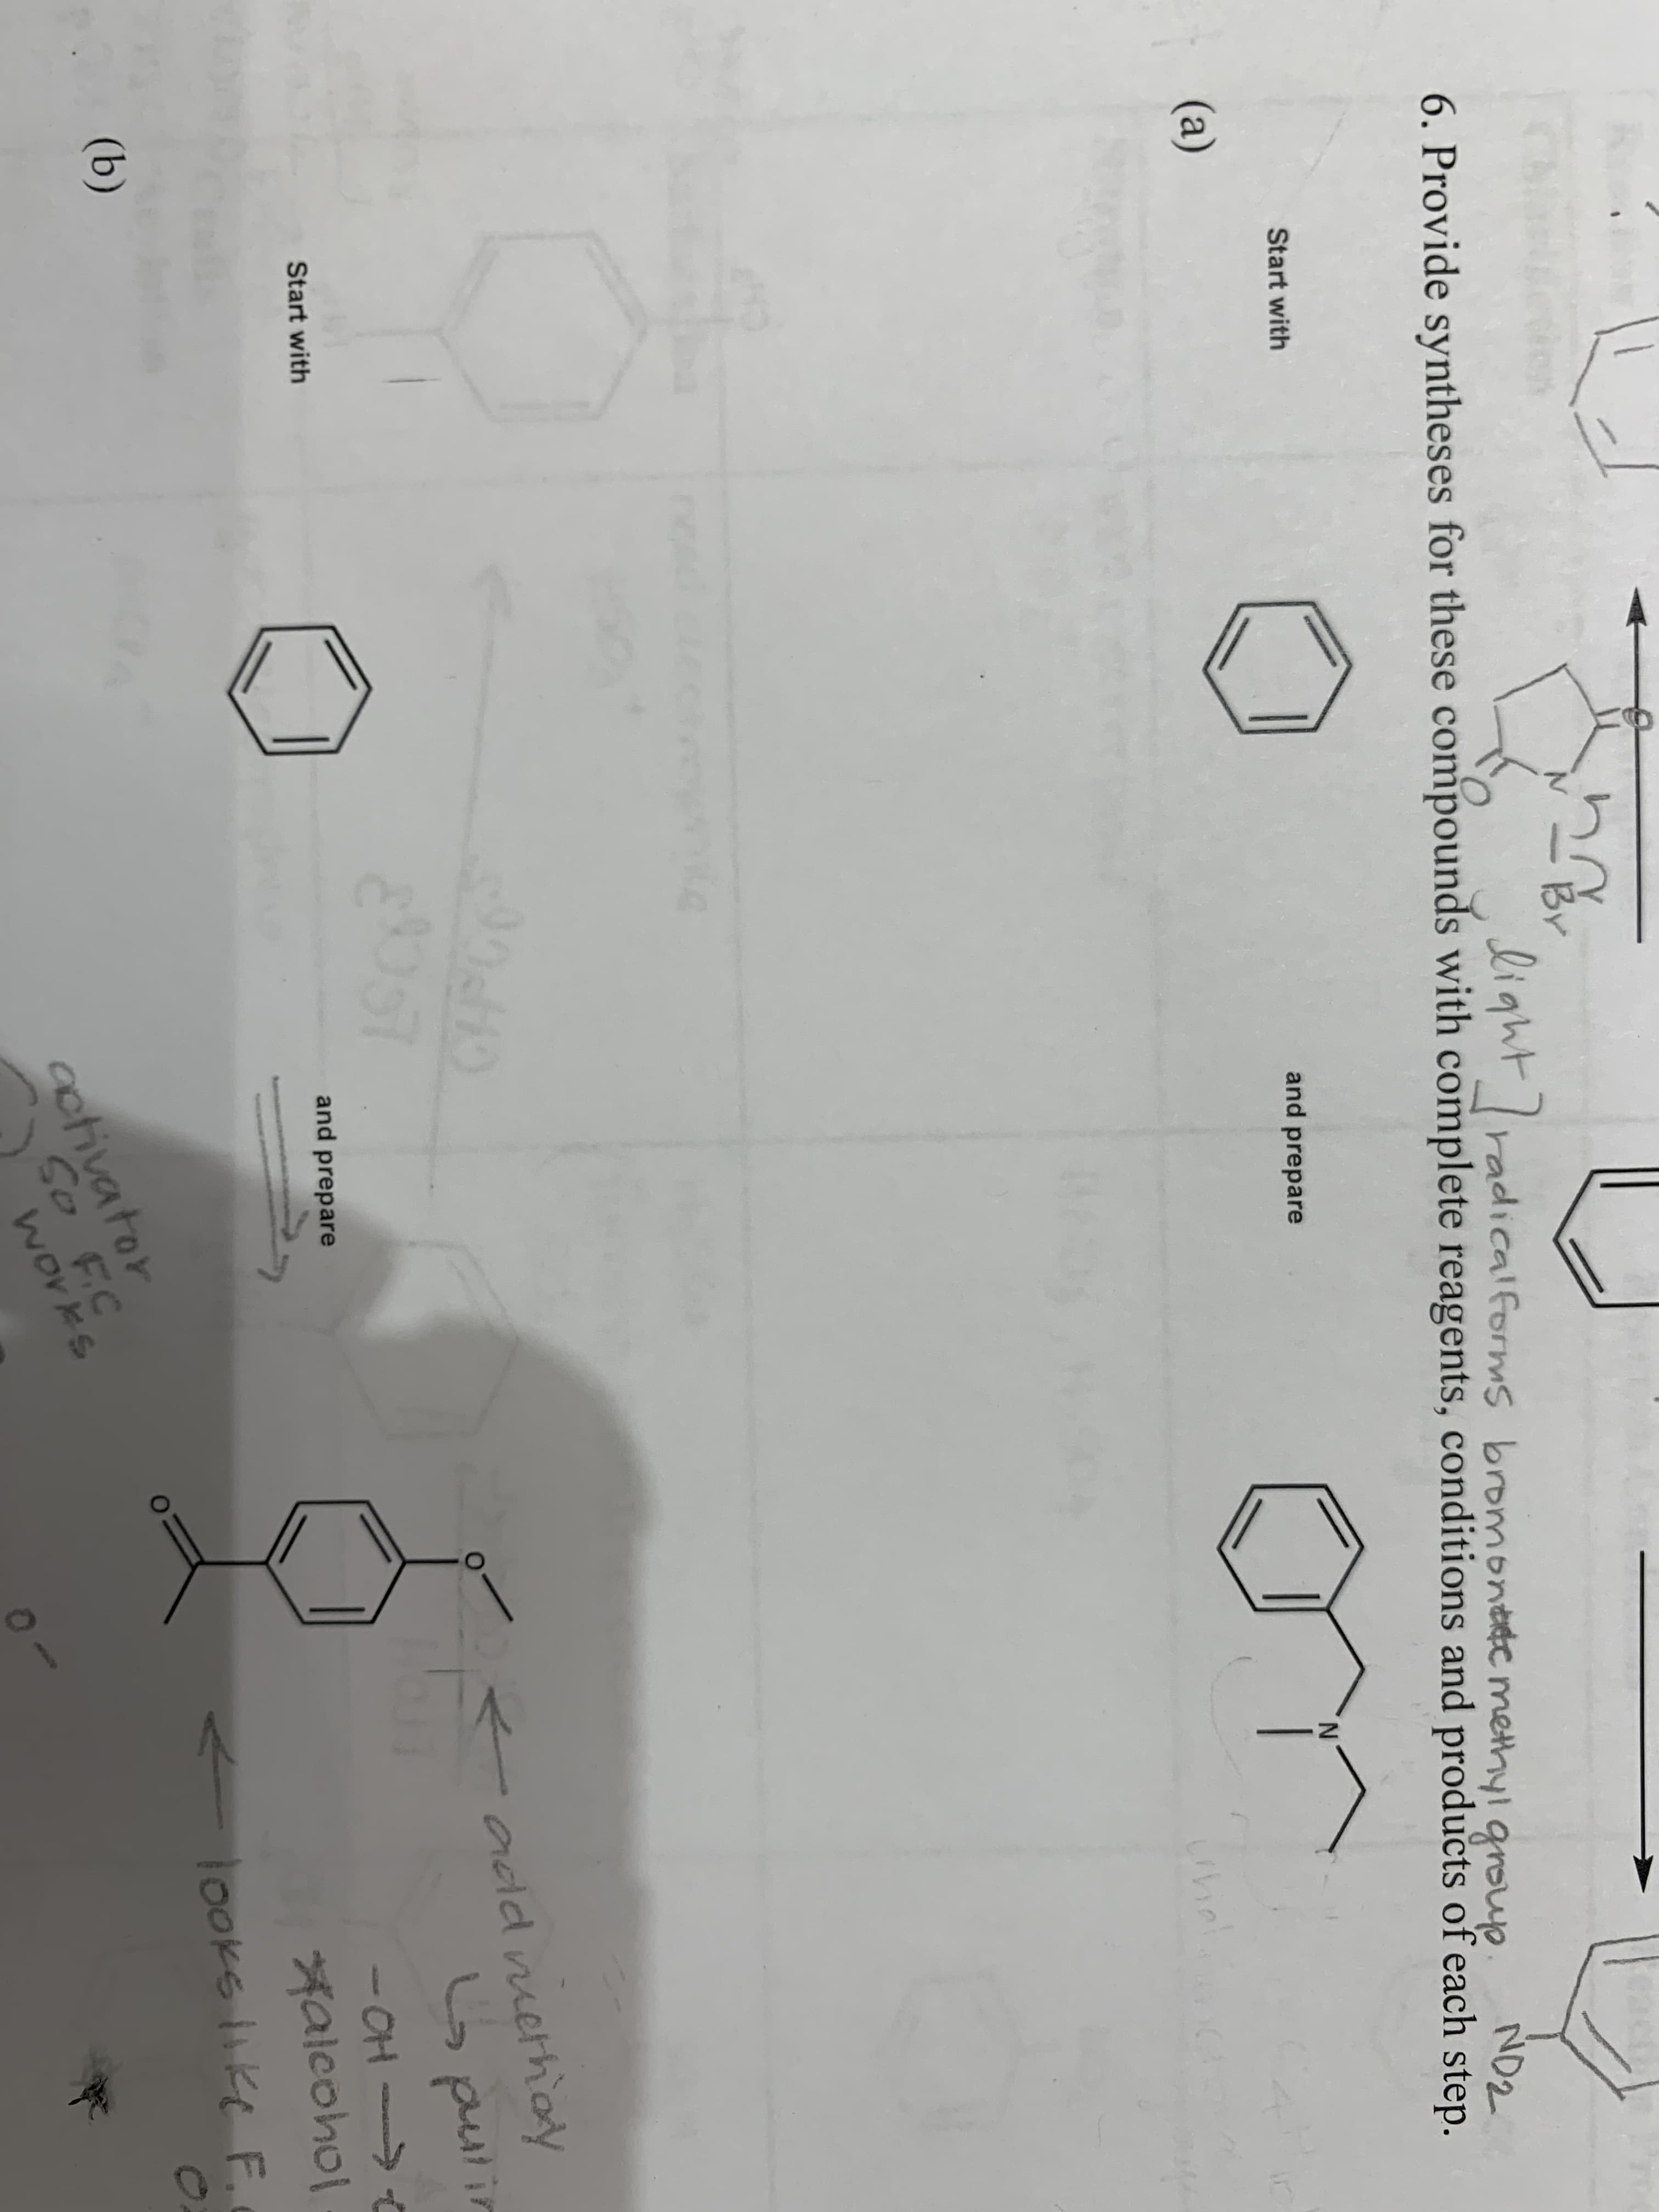 N
BY
TO
Ligwt radicalforms bromonttc methyl group
ND2
6. Provide syntheses for these compounds with complete reagents, conditions and products of each step.
Start with
and prepare
(a)
Chinl
90410
0OO
adld niethoy
C pustin
Start with
- OH
falcoho
looks ike F
and prepare
t
(b)
octivator
So F.C
works
